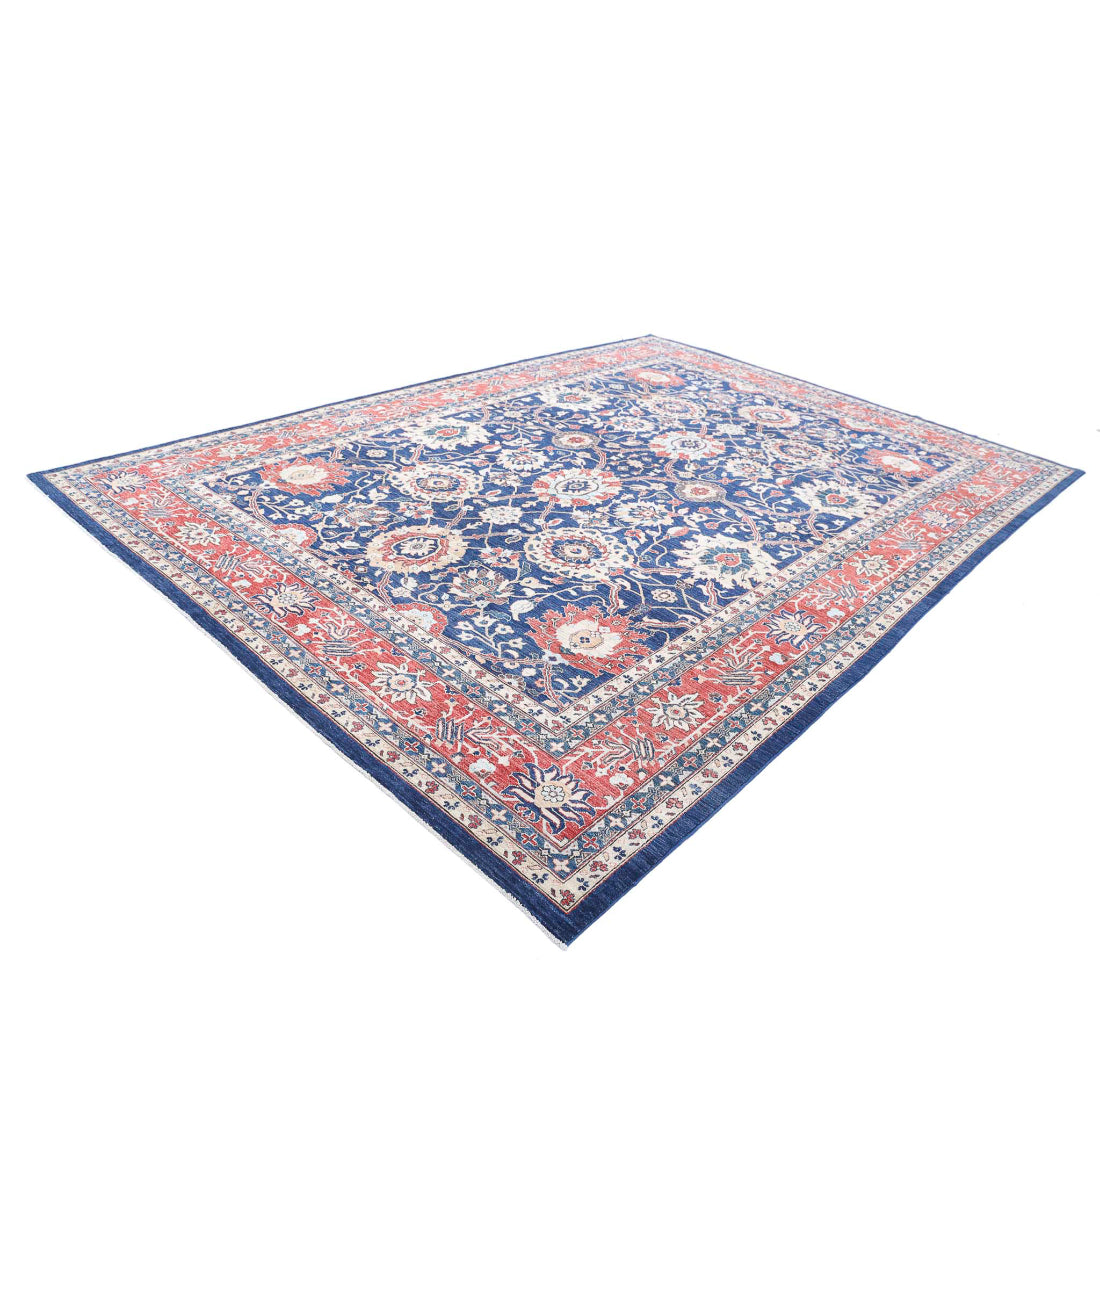 Ziegler 9'10'' X 13'9'' Hand-Knotted Wool Rug 9'10'' x 13'9'' (295 X 413) / Blue / Red